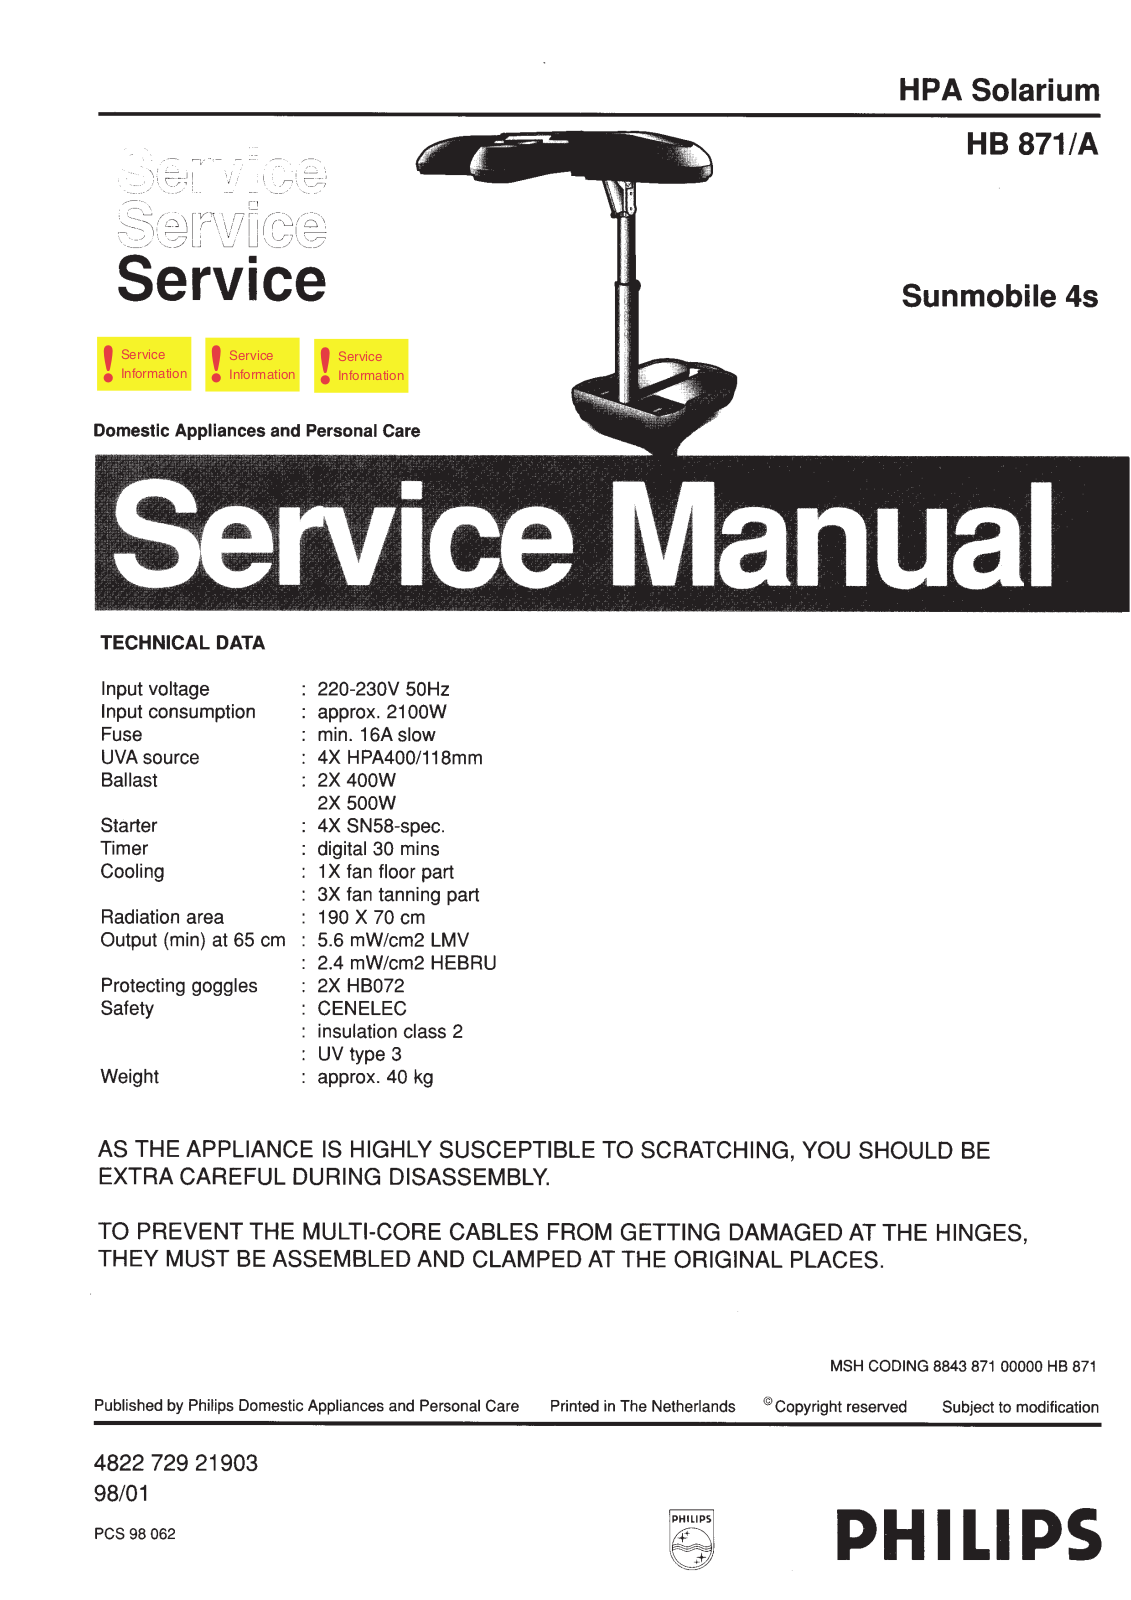 Philips HB871-A Service Manual